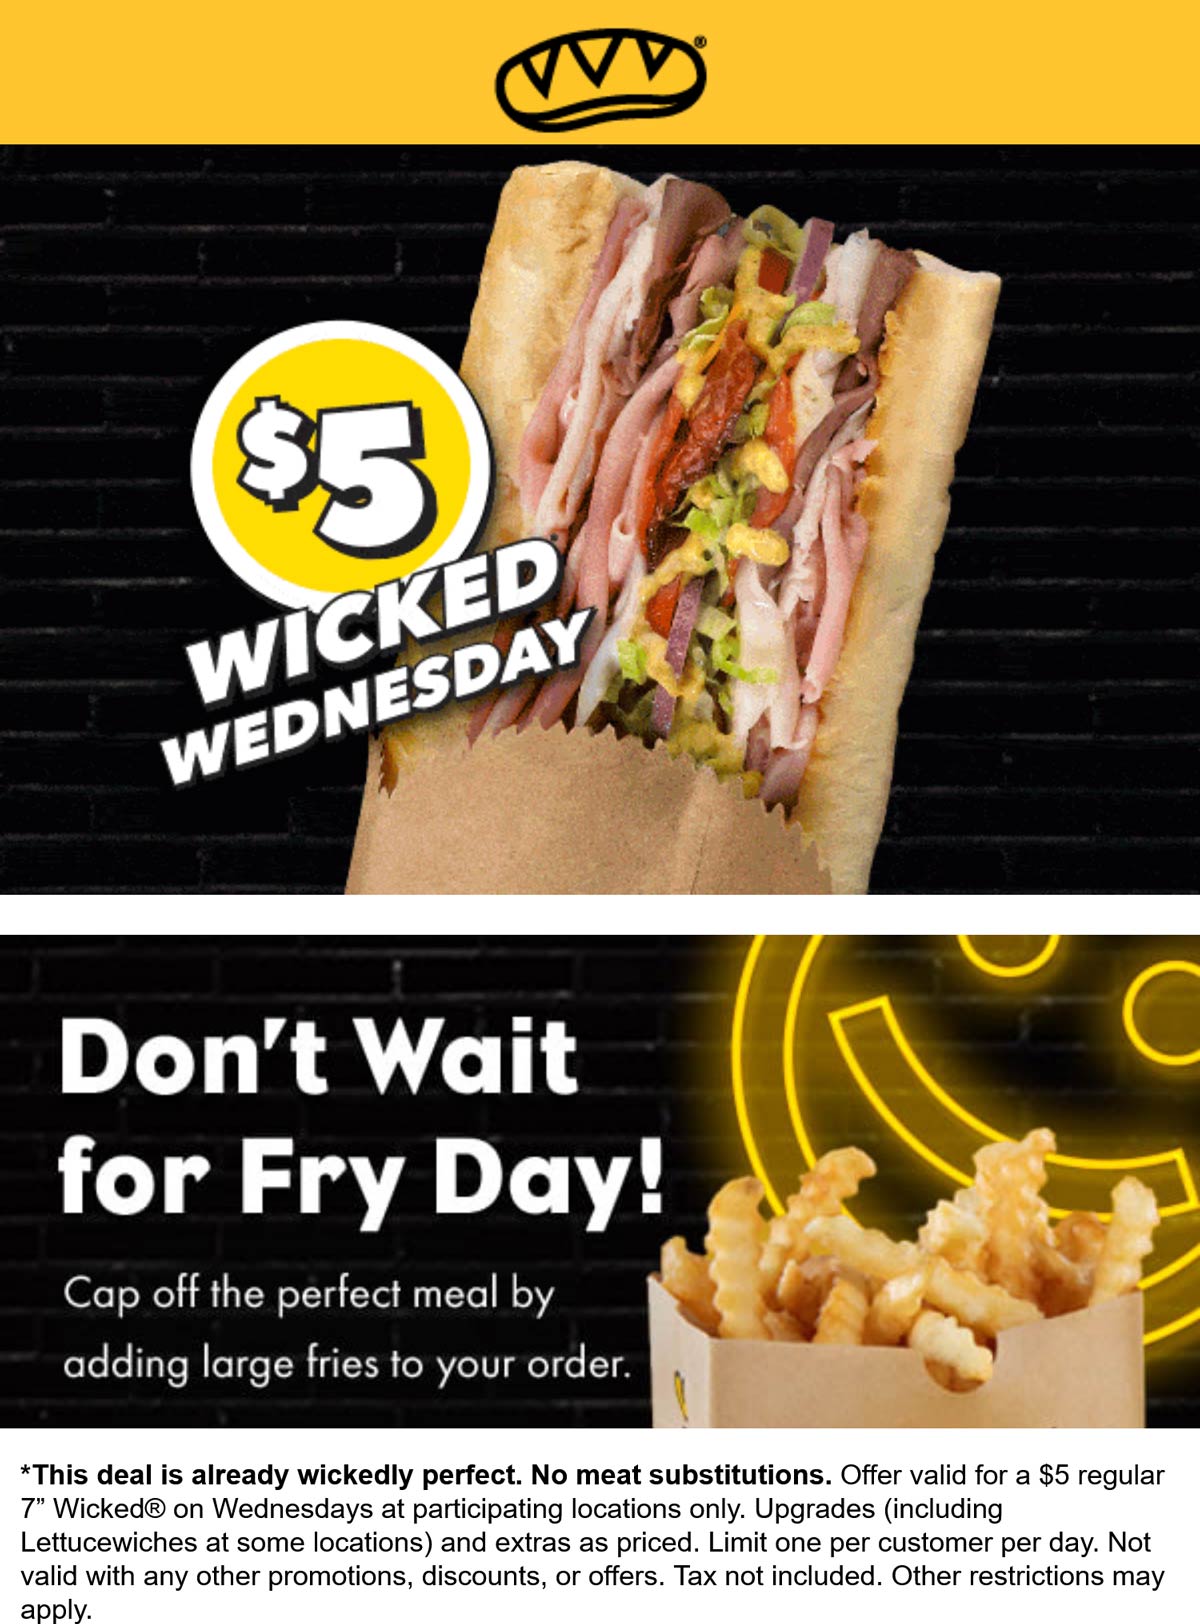 Which Wich restaurants Coupon  $5 wicked sandwich today at Which Wich #whichwich 